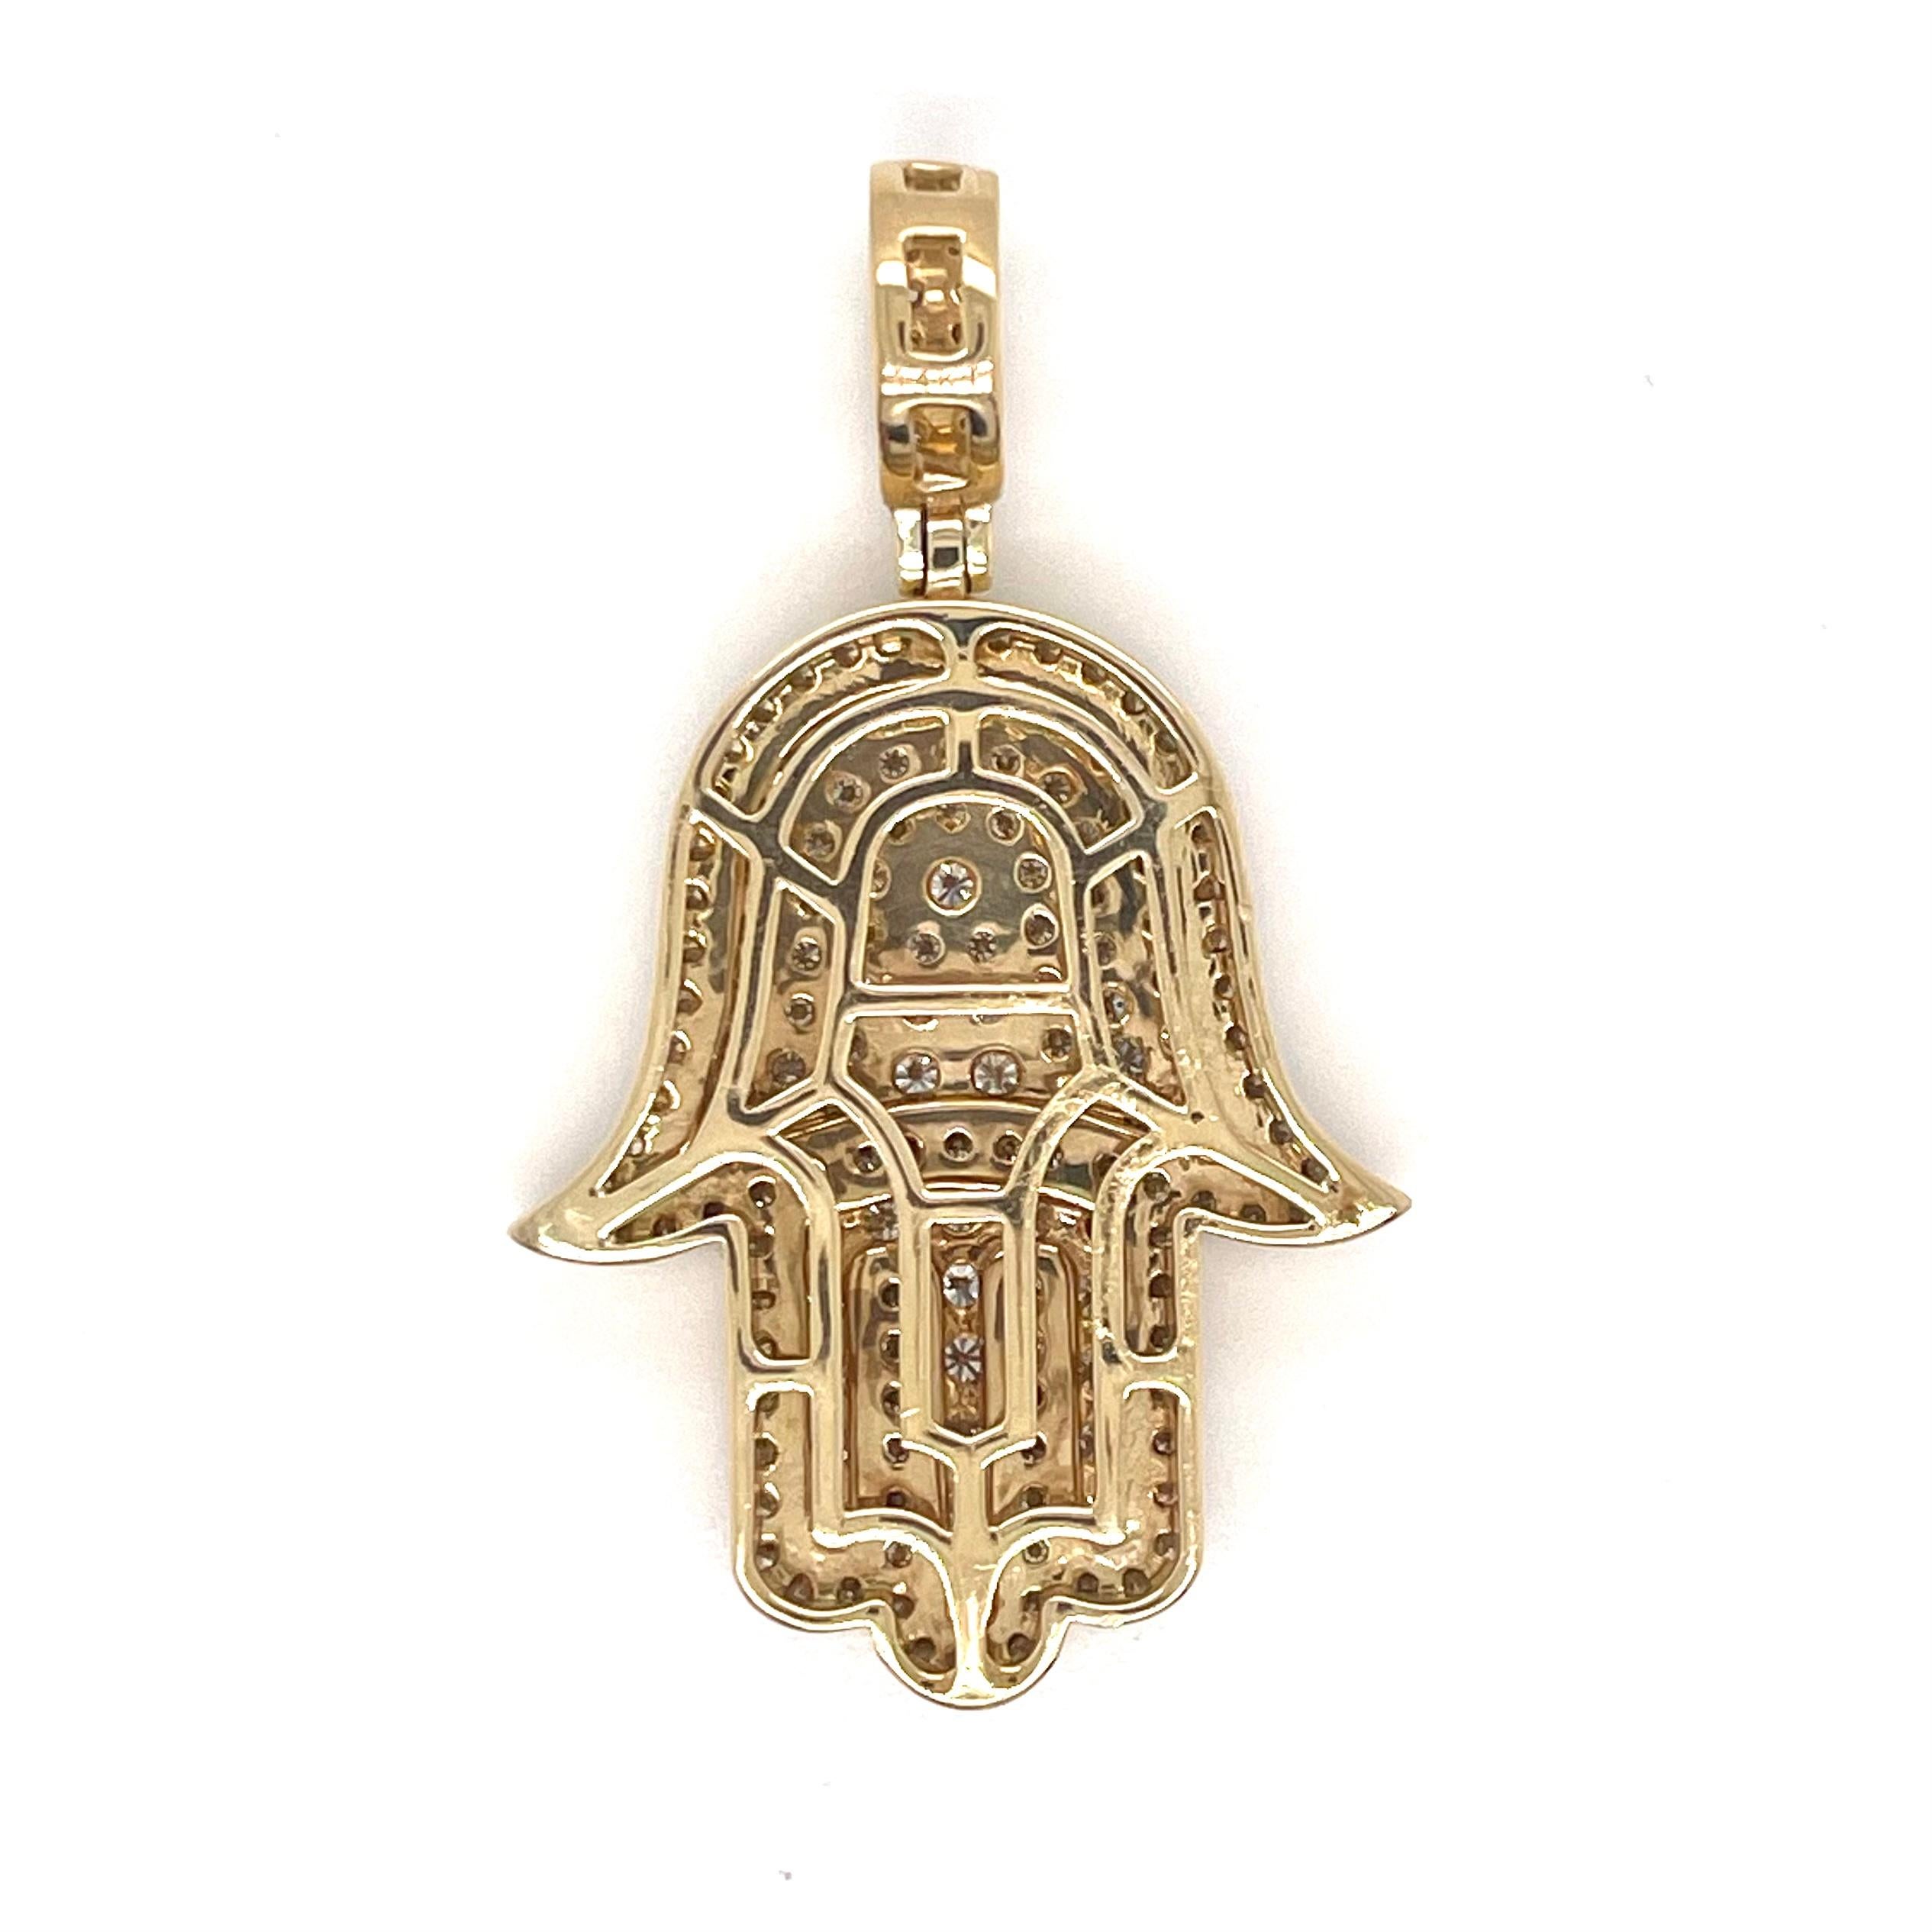 Style: Diamond Hamsa Pendant

Metal: Yellow Gold

Metal Purity: 14K

Stones: 169 Diamonds

Diamond Color: I​

Diamond Clarity: VS1

Total Carat Weight (ct): Approx 2.2 ct

Total Item Weight (g): 10.5 g 

Dimensions: 4.5 cm (including